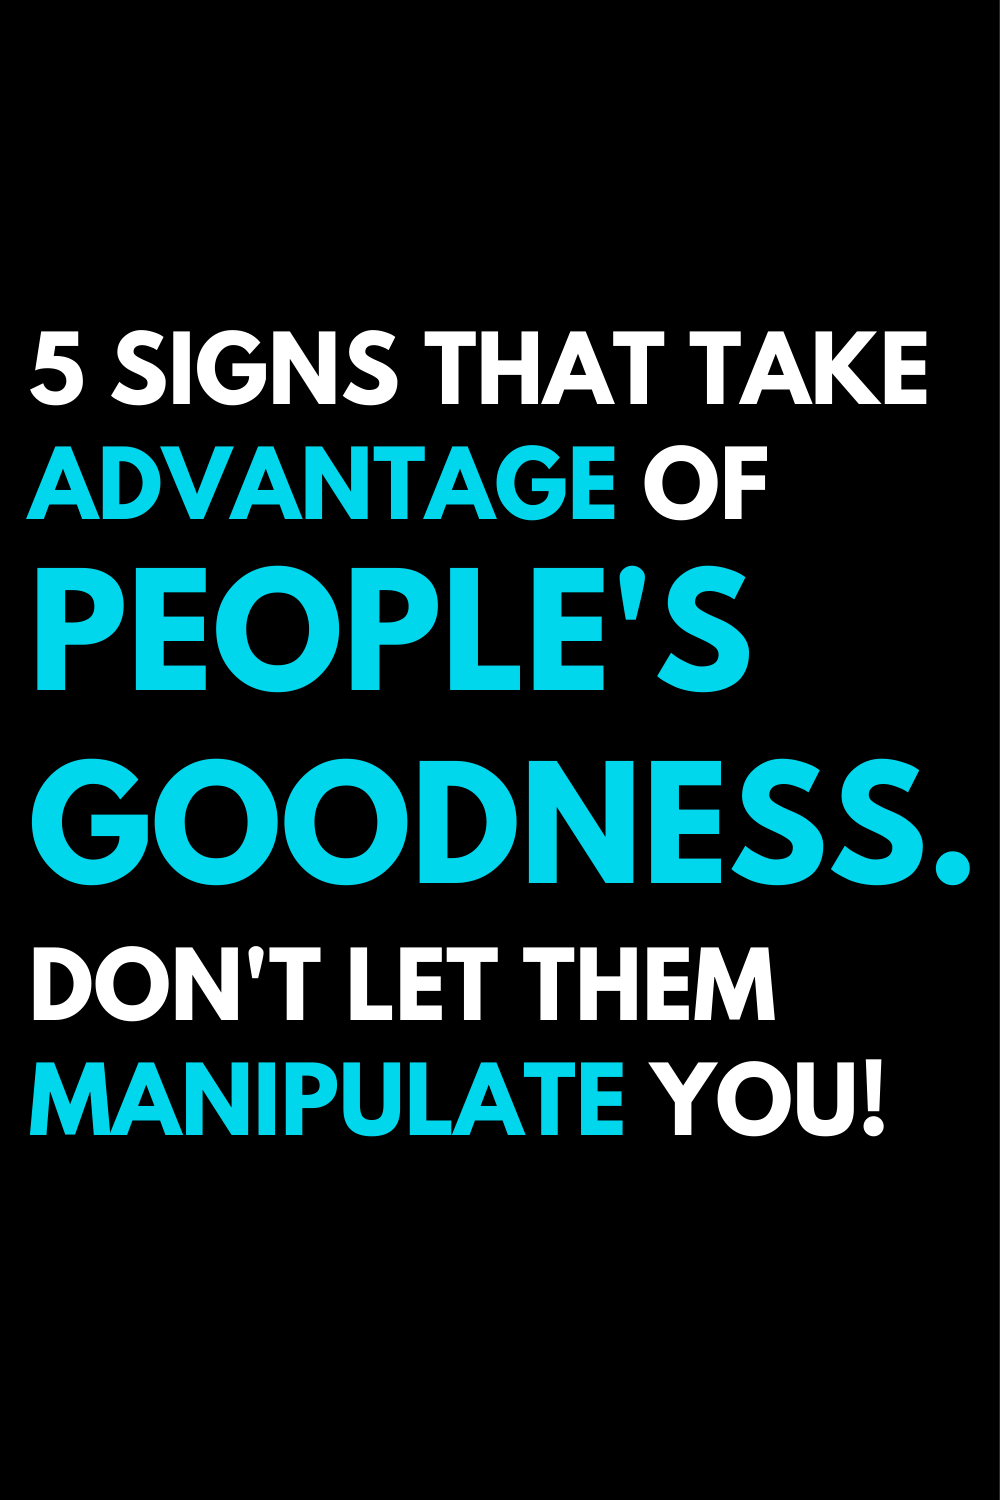 5 signs that take advantage of people's goodness. Don't let them manipulate you!